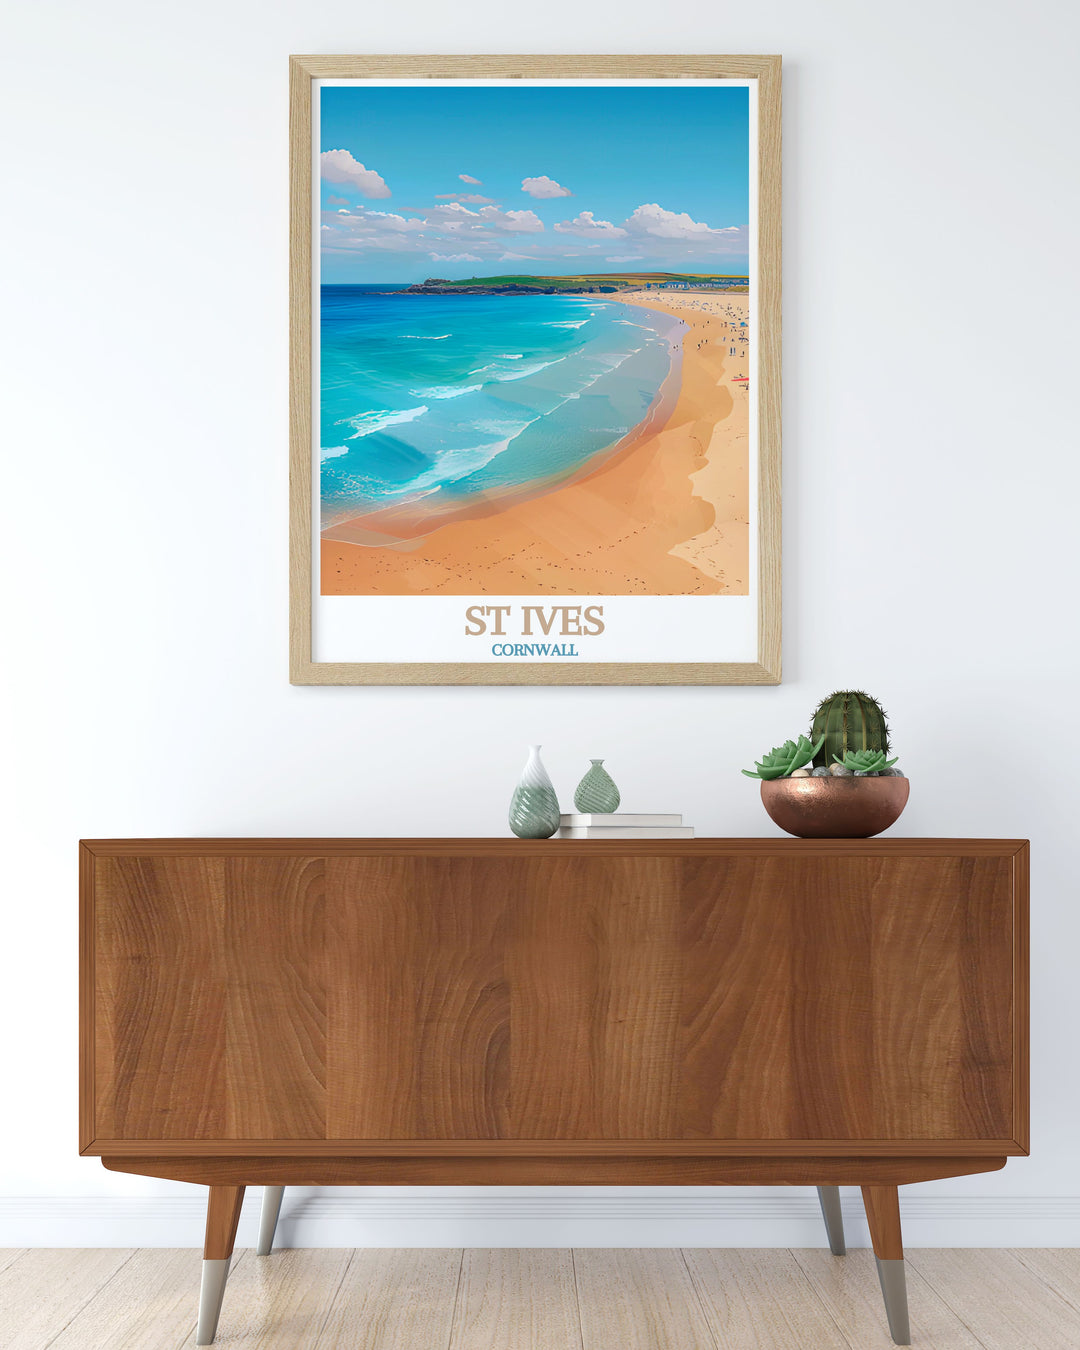 Featuring the iconic Porthmeor Beach and the lively atmosphere of St Ives, this travel poster is perfect for those who love exploring historic towns and appreciating coastal beauty.